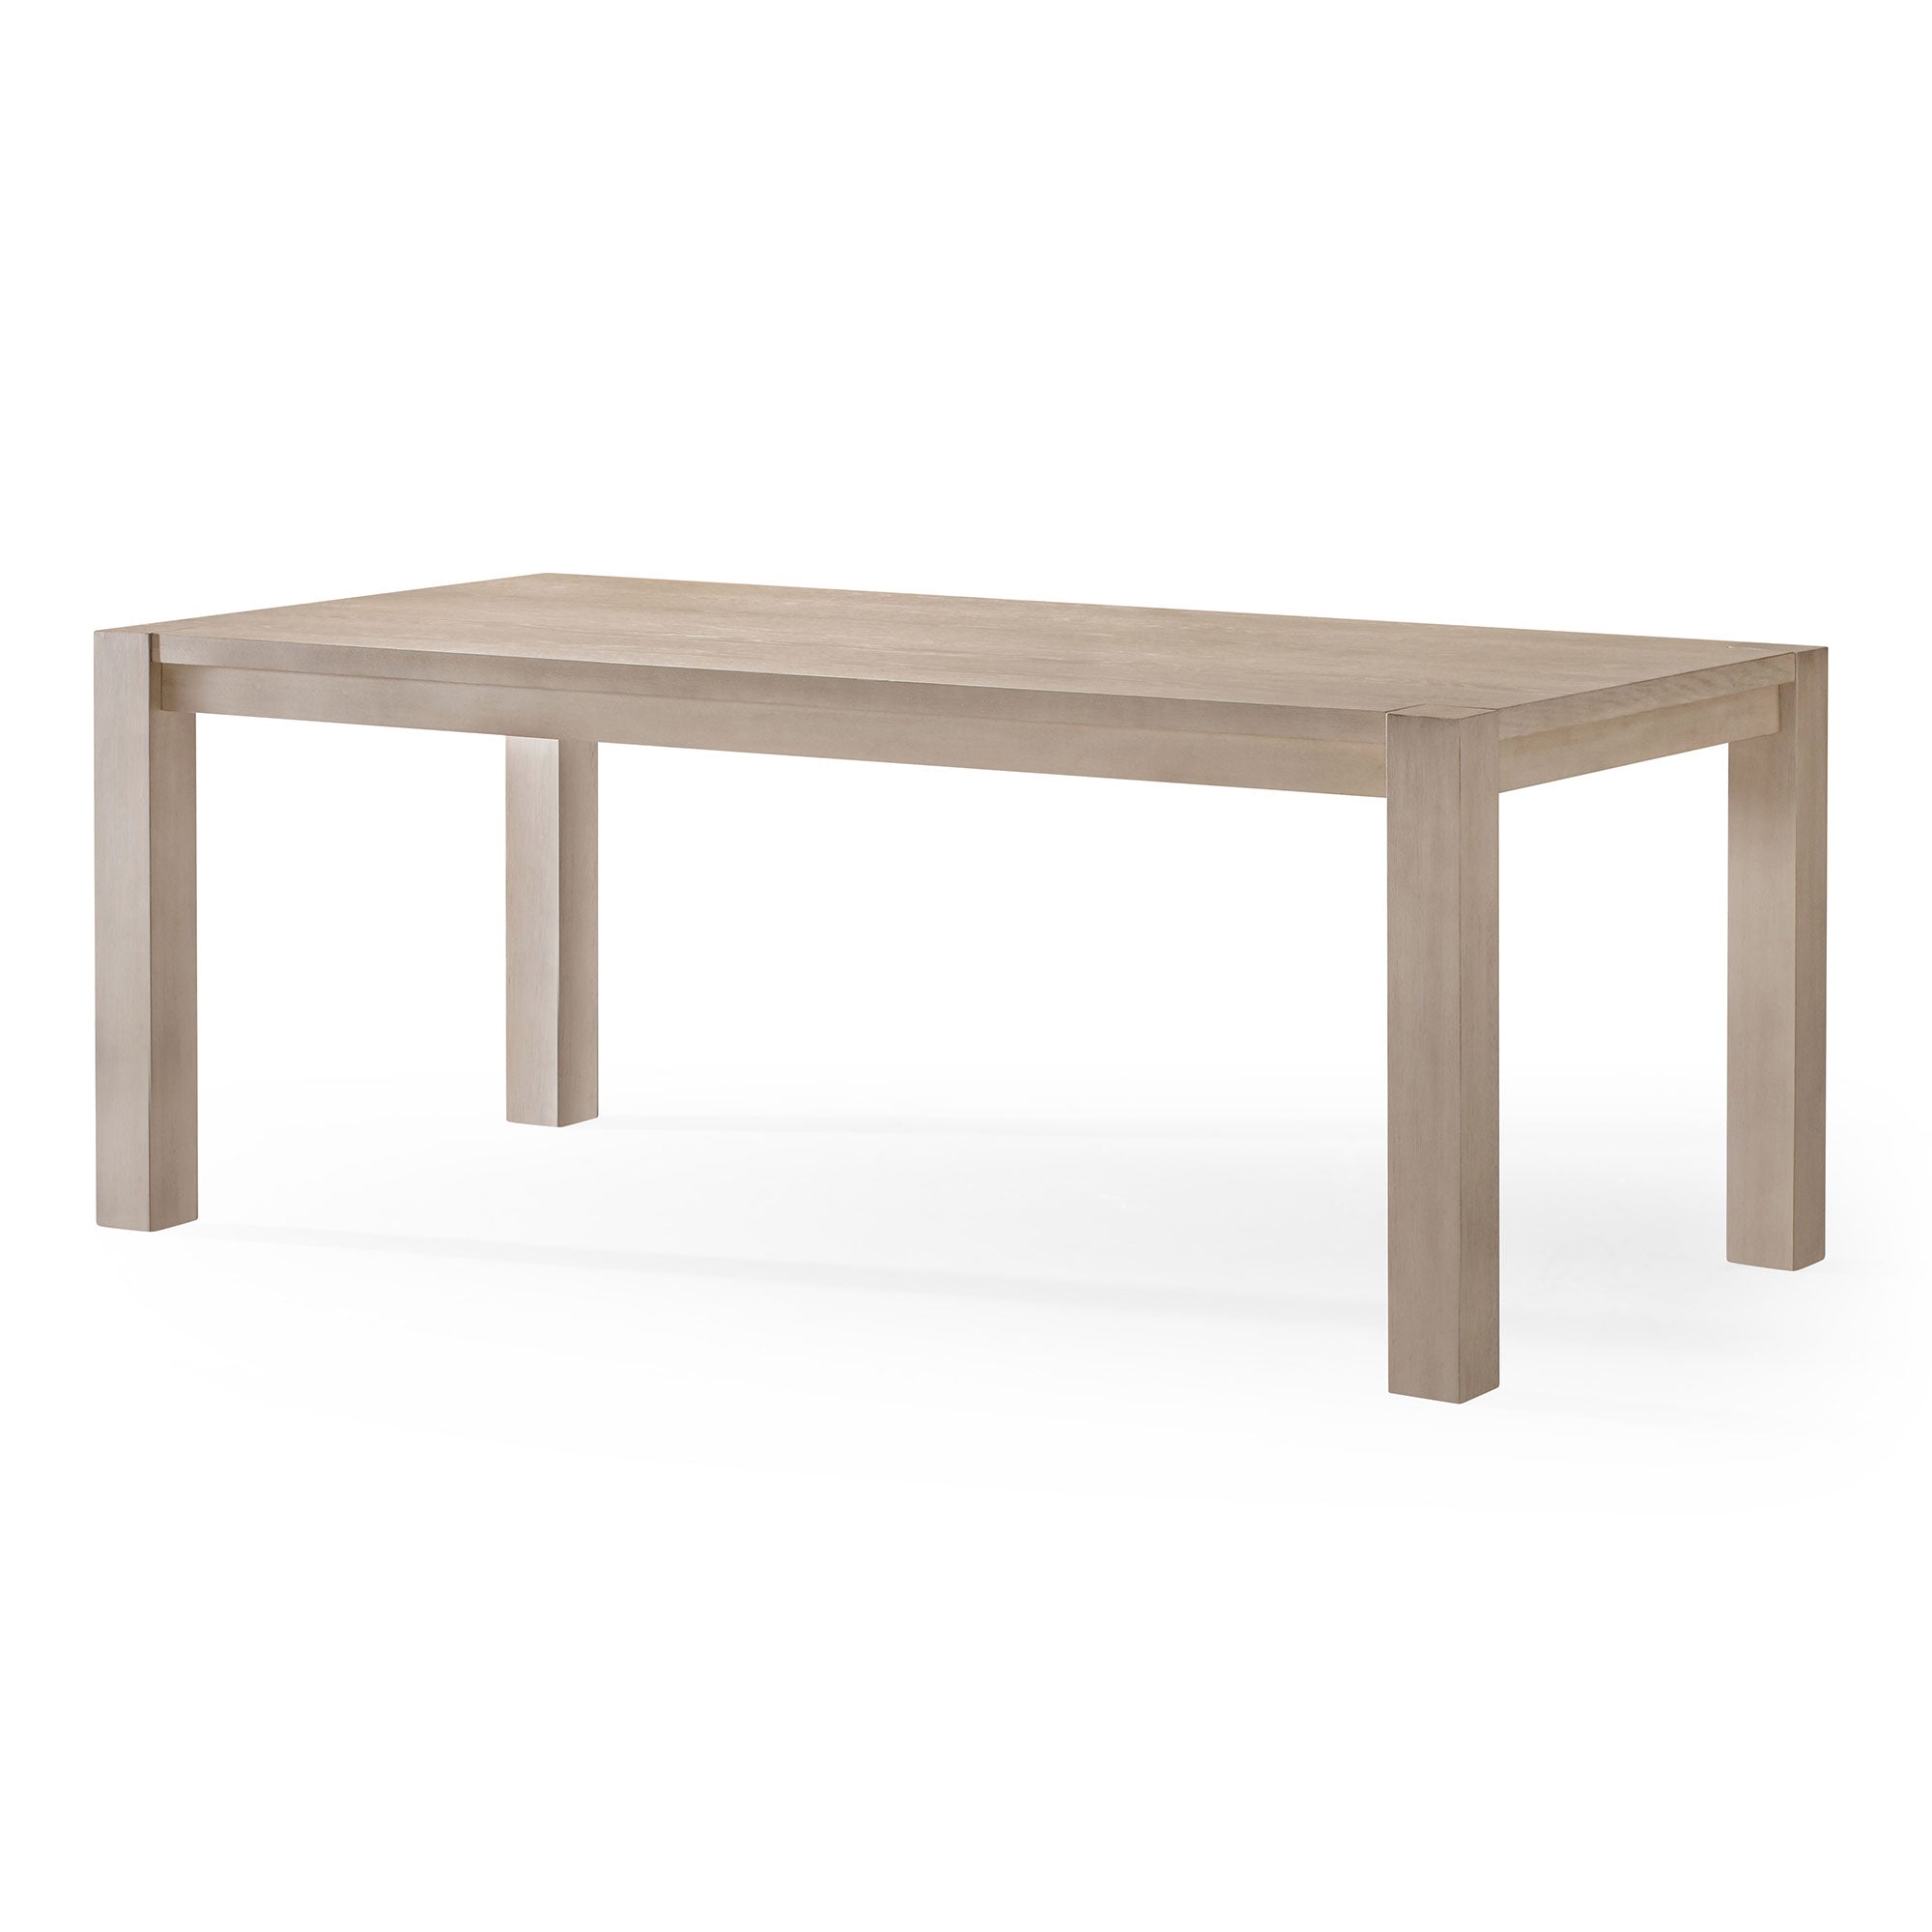 Maven-Lane-Cleo-Contemporary-Wooden-Dining-Table-in-Refined-White-Finish-Kitchen-&-Dining-Room-Tables